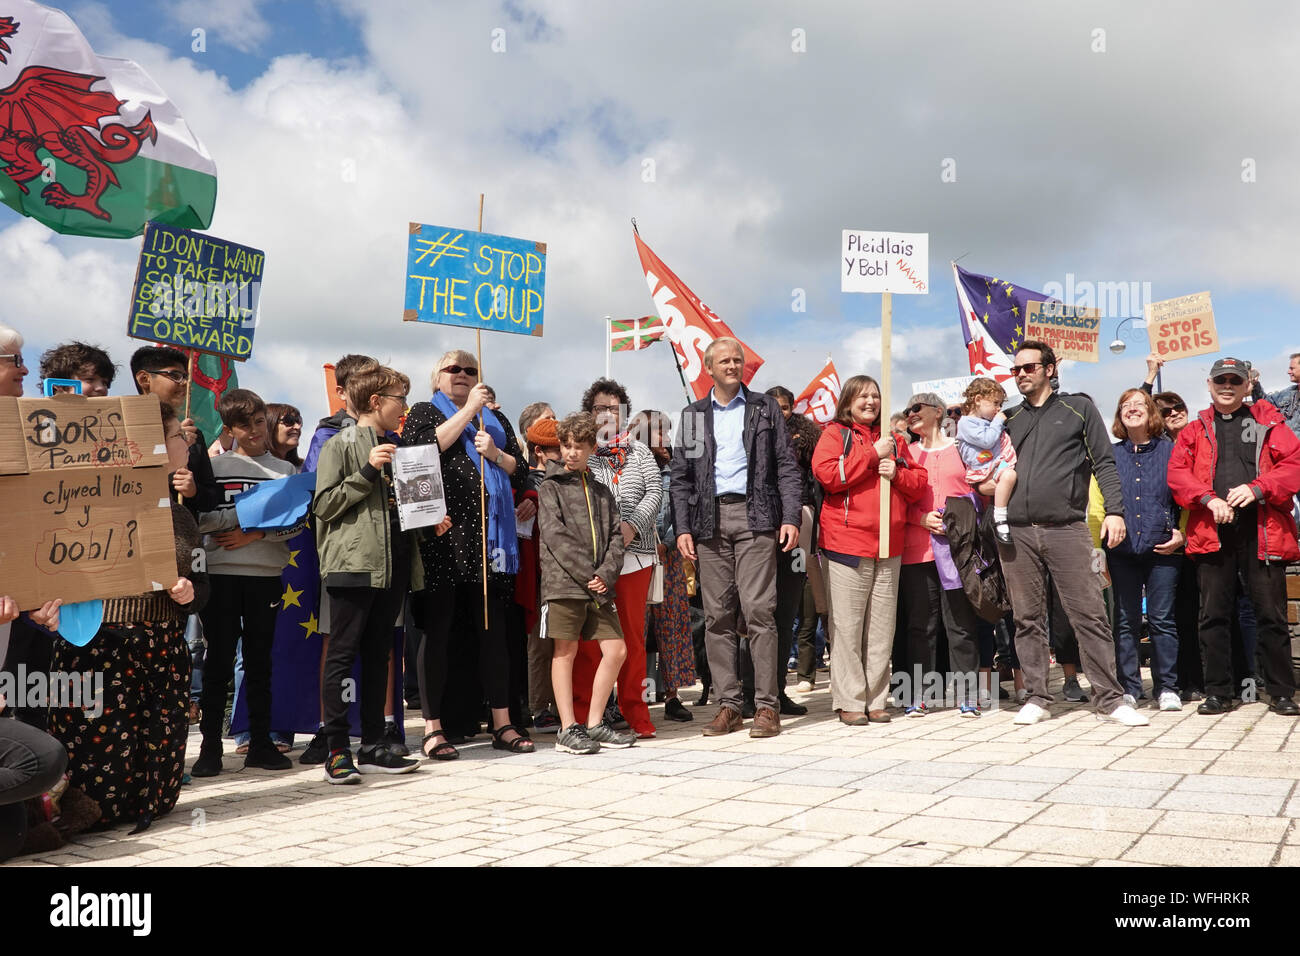 31 August 2019. 'Stop the Coup' protest rally at Aberystwyth, Ceredigion. t is estimated that 2500 people attended the protest. Credit: atgof.co/Alamy Live News Stock Photo